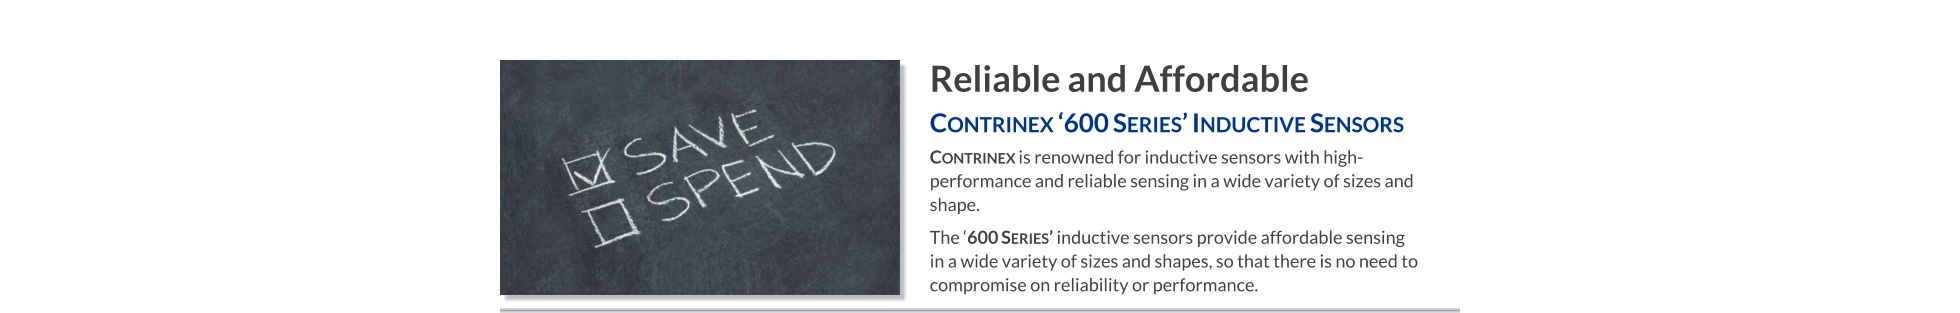 Reliable and Affordable Contrinex ‘600 Series’ Inductive Sensors   Contrinex is renowned for inductive sensors with high-performance and reliable sensing in a wide variety of sizes and shape.  The ‘600 Series’ inductive sensors provide affordable sensing     in a wide variety of sizes and shapes, so that there is no need to compromise on reliability or performance.